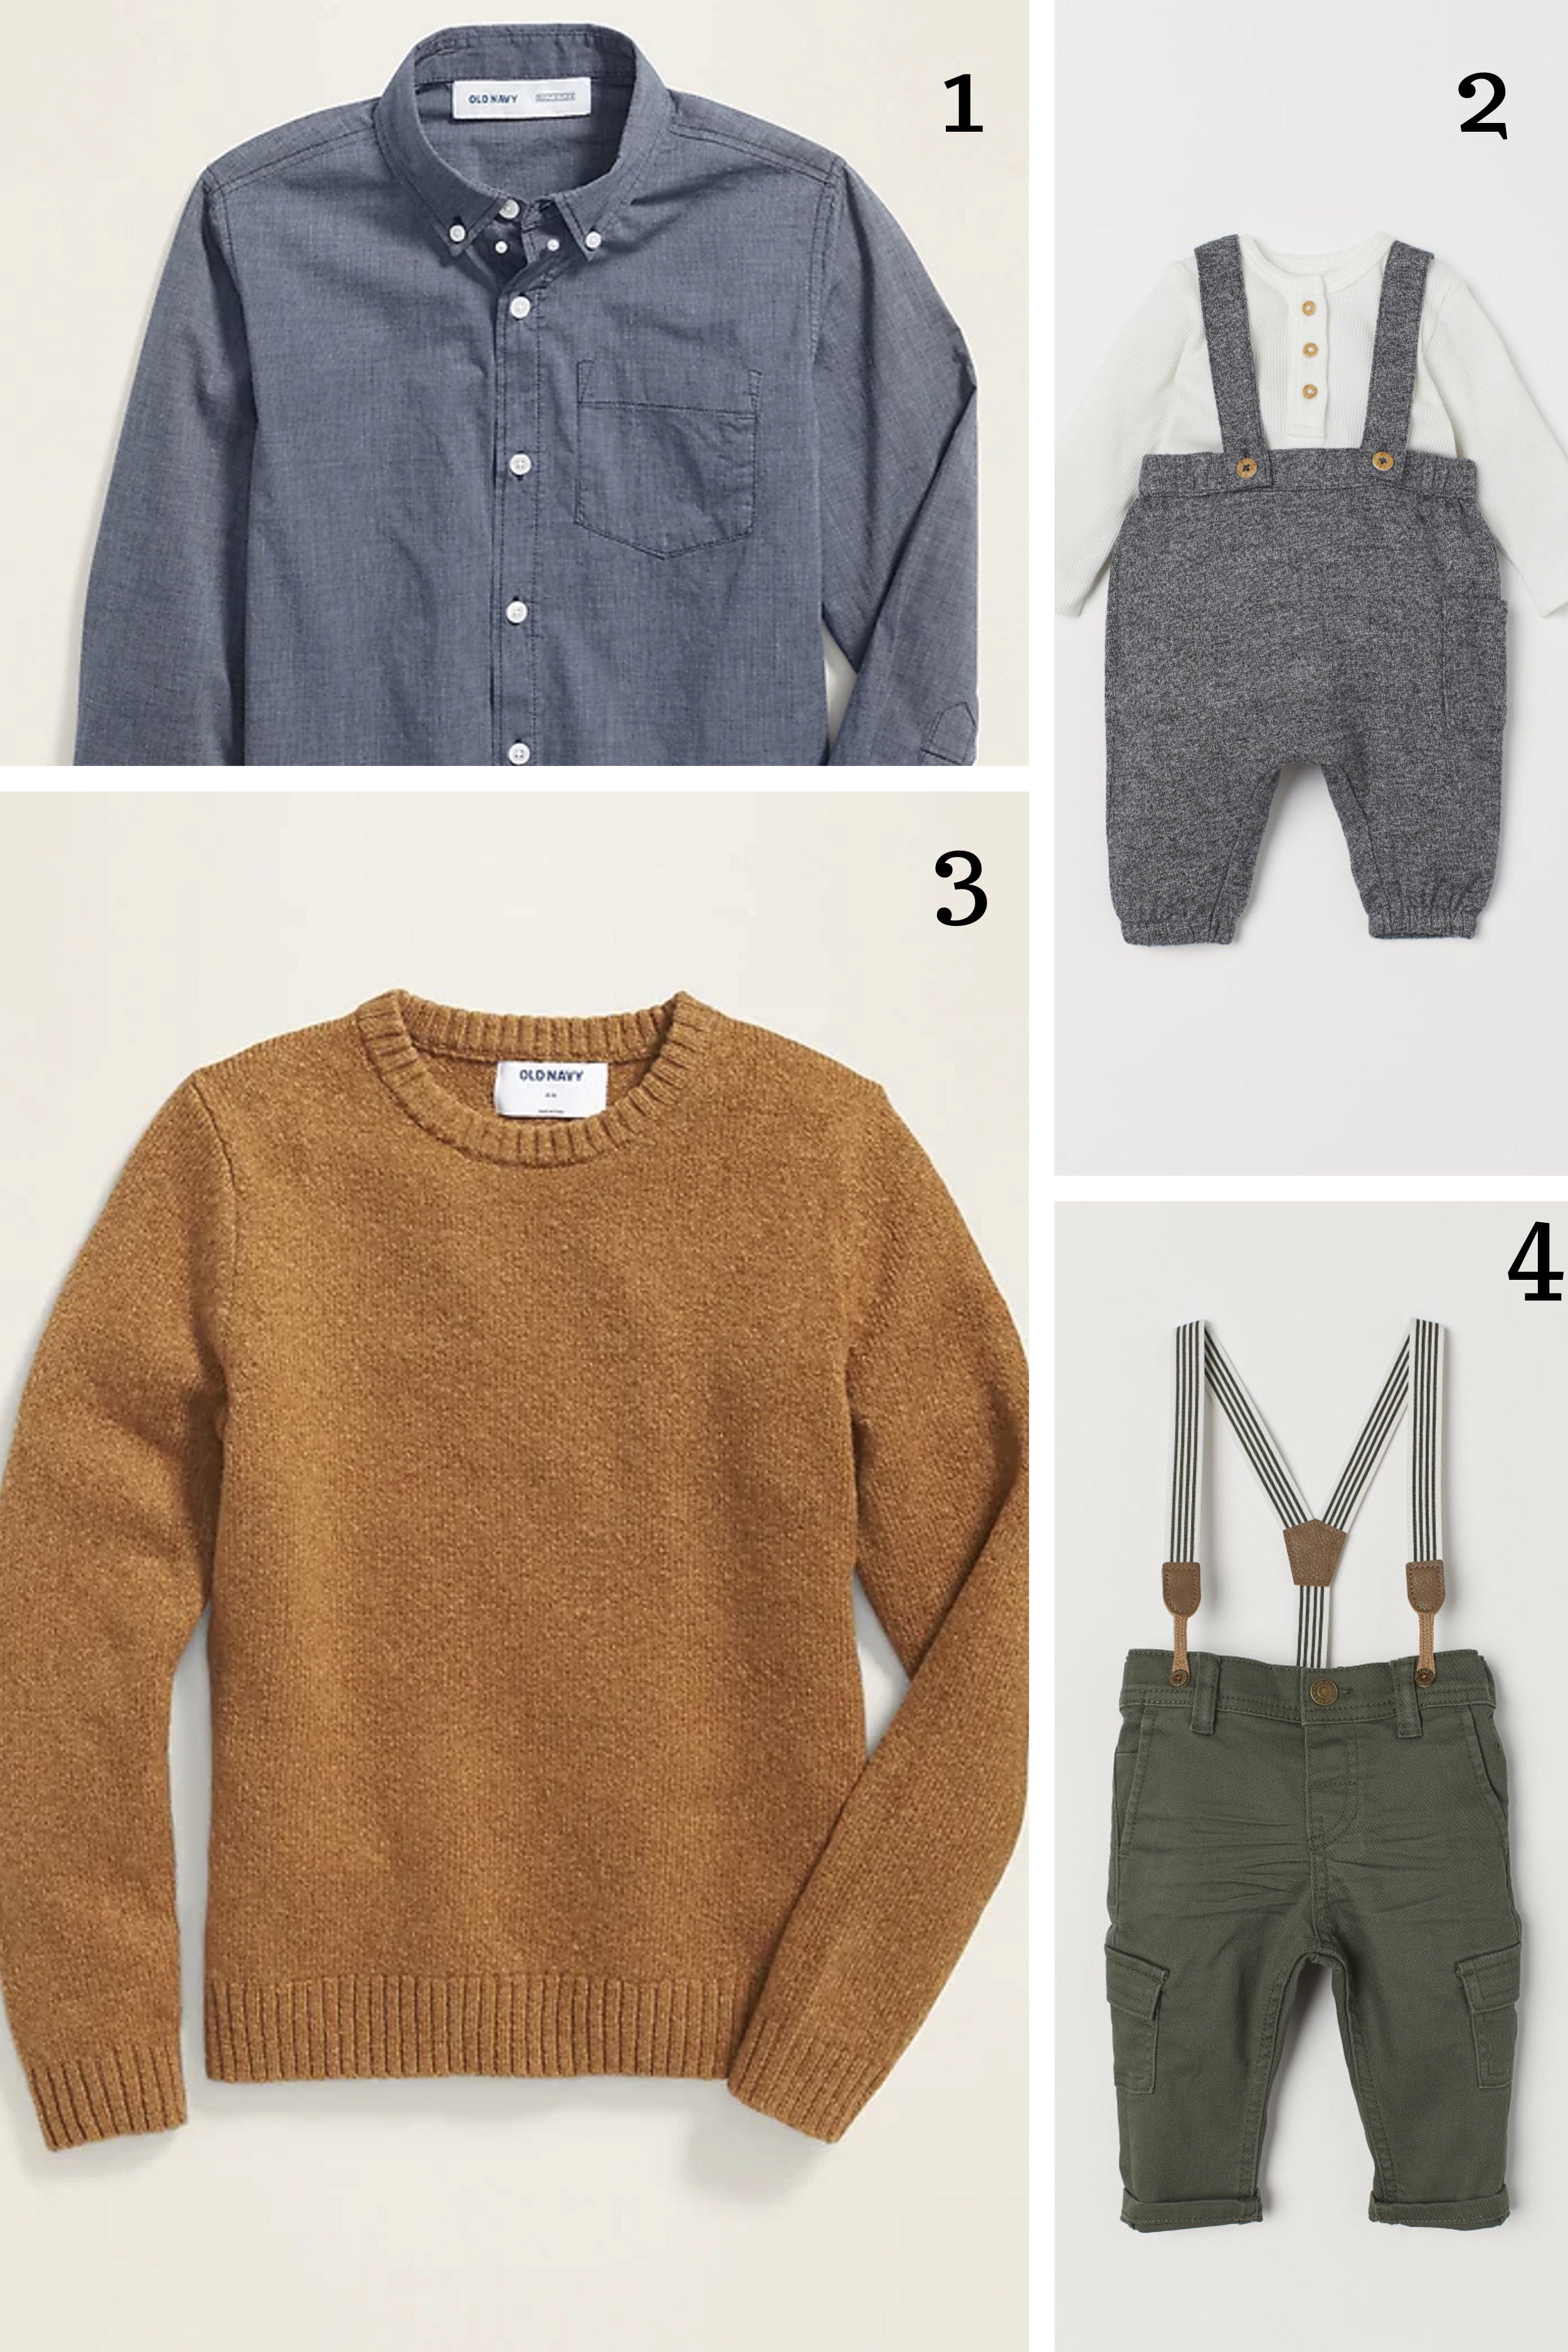 1. Chambray button up || 2. Shirt and overalls || 3. Crew neck sweater || 4. Twill pants with suspenders